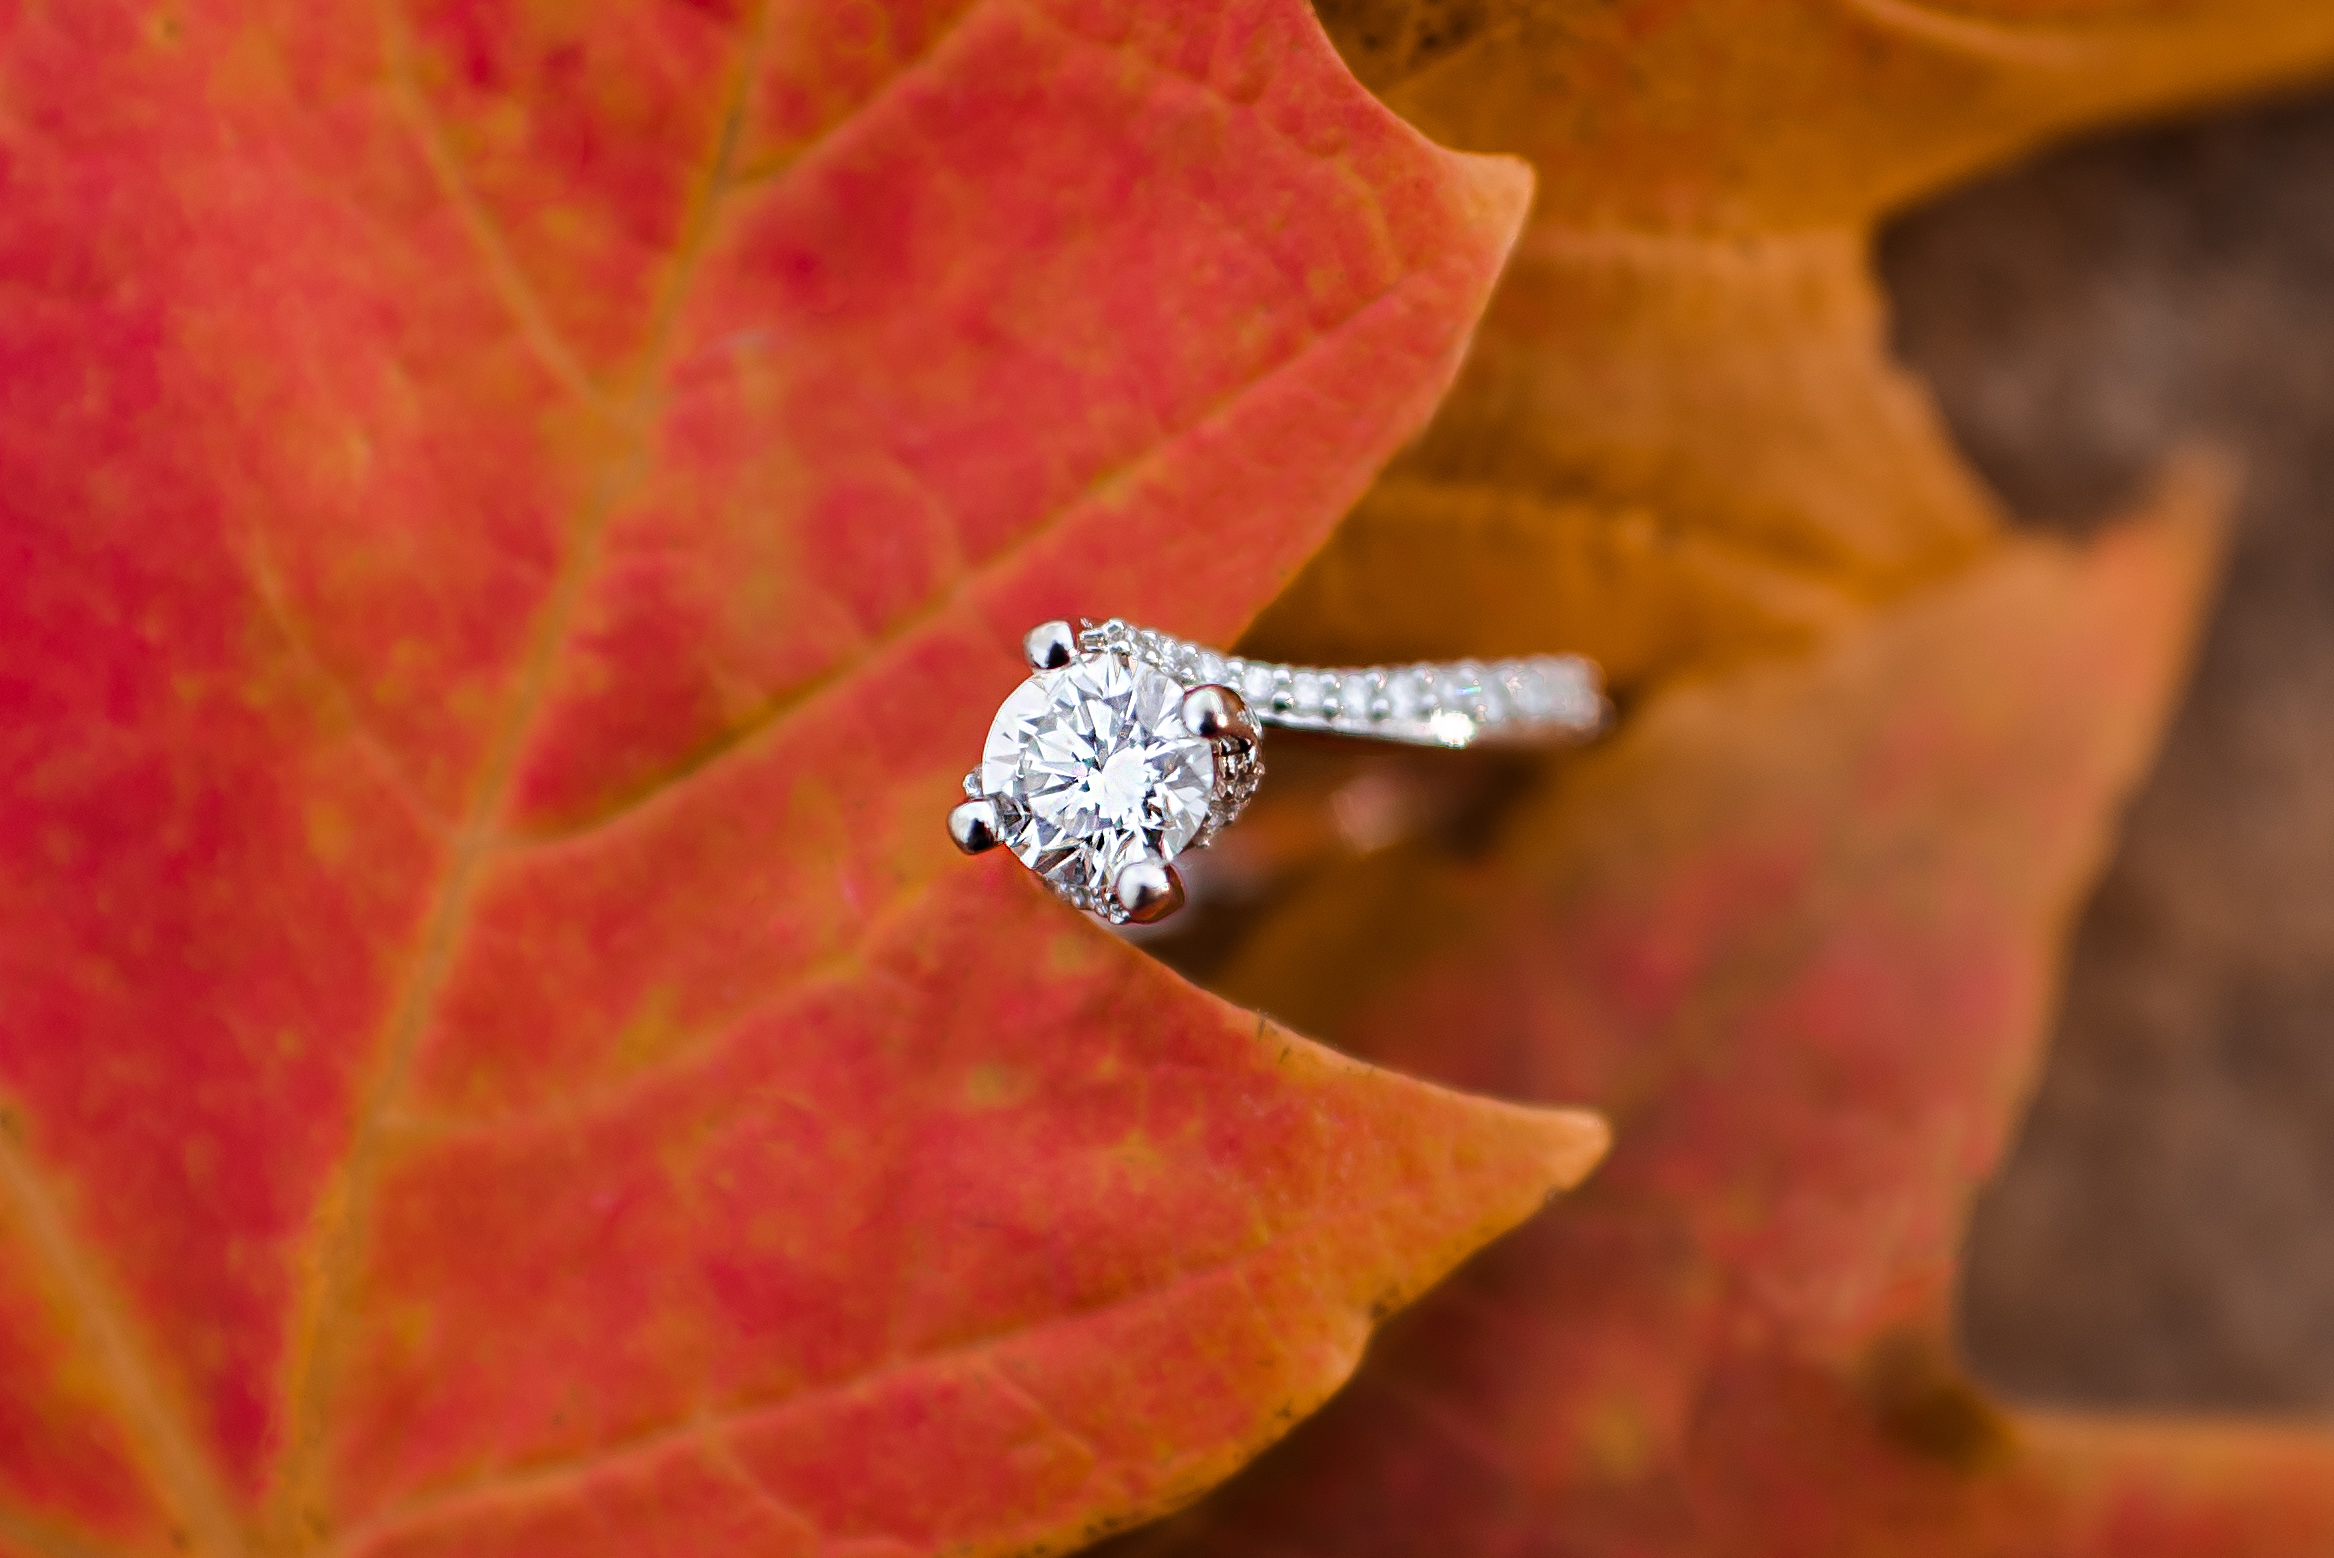 During engagement sessions I take time to get photos of the bride's new engagement ring for her gallery.